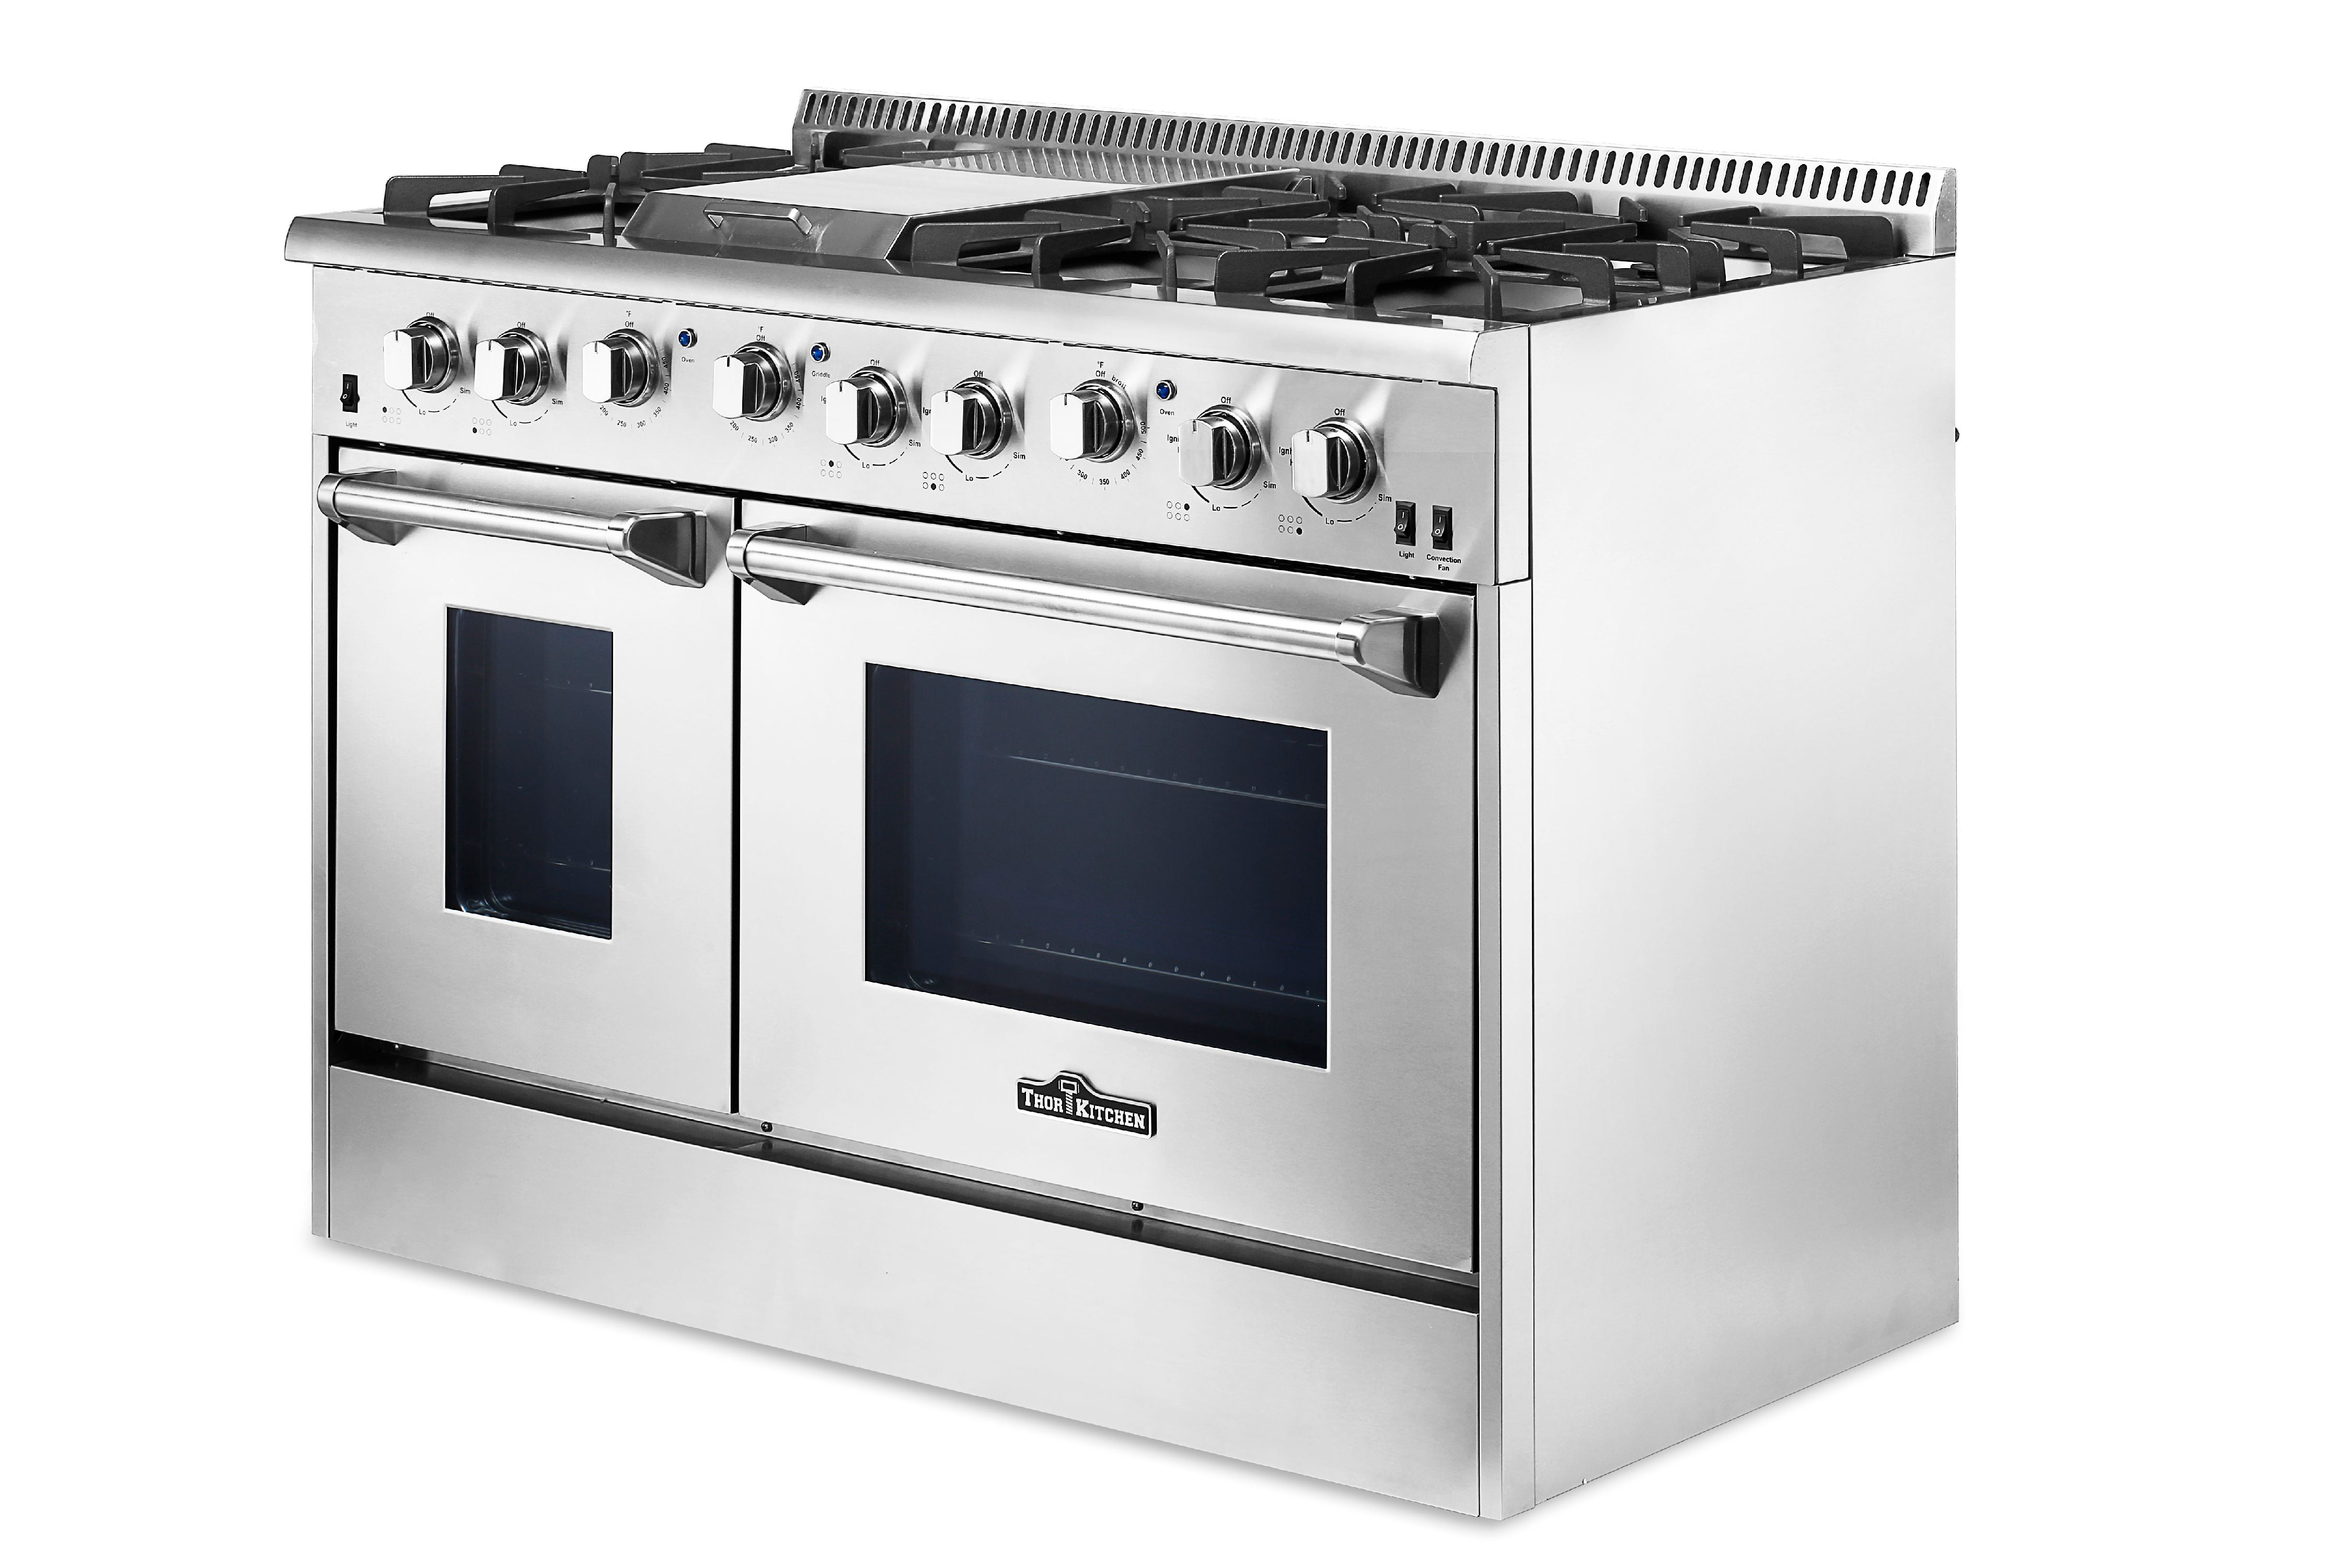 Convection 48" THOR KITCHEN All Gas Range HRG4808U Two Oven Griddle 6 Burners 